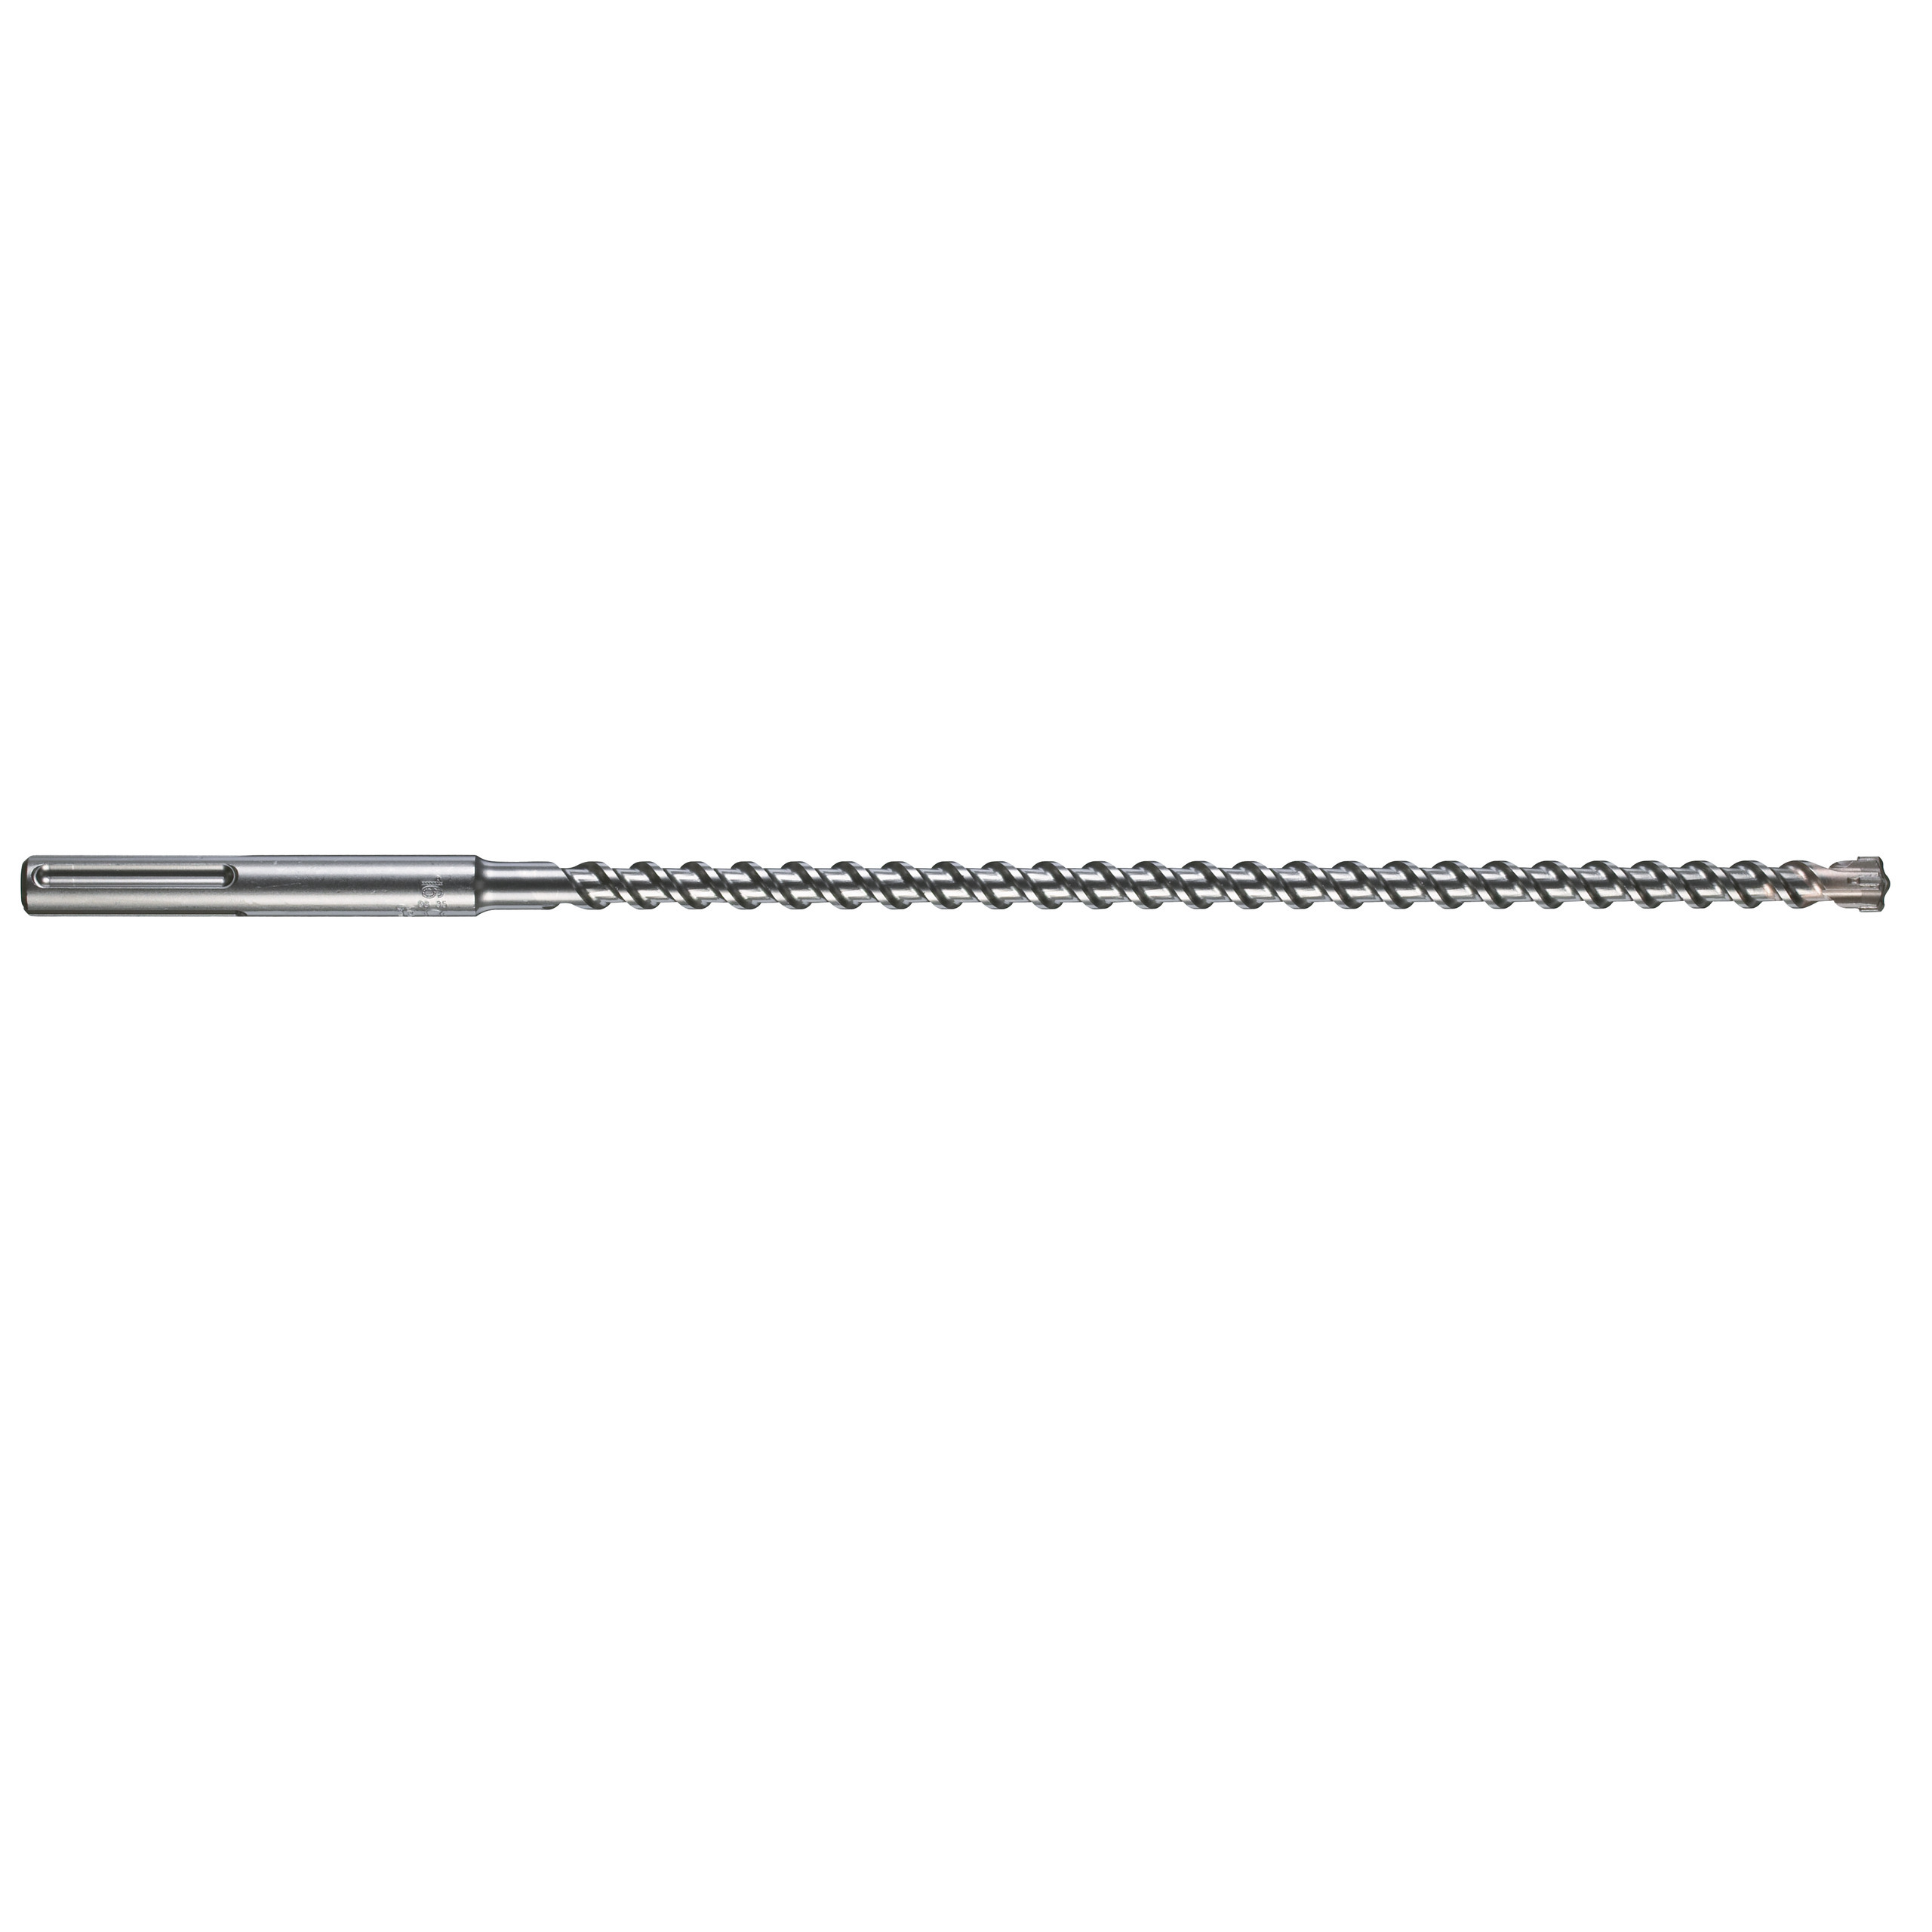 FORET SDSMAX 4T 16X540MM (X1) MILWAUKEE ACCESSOIRES - 4932352757